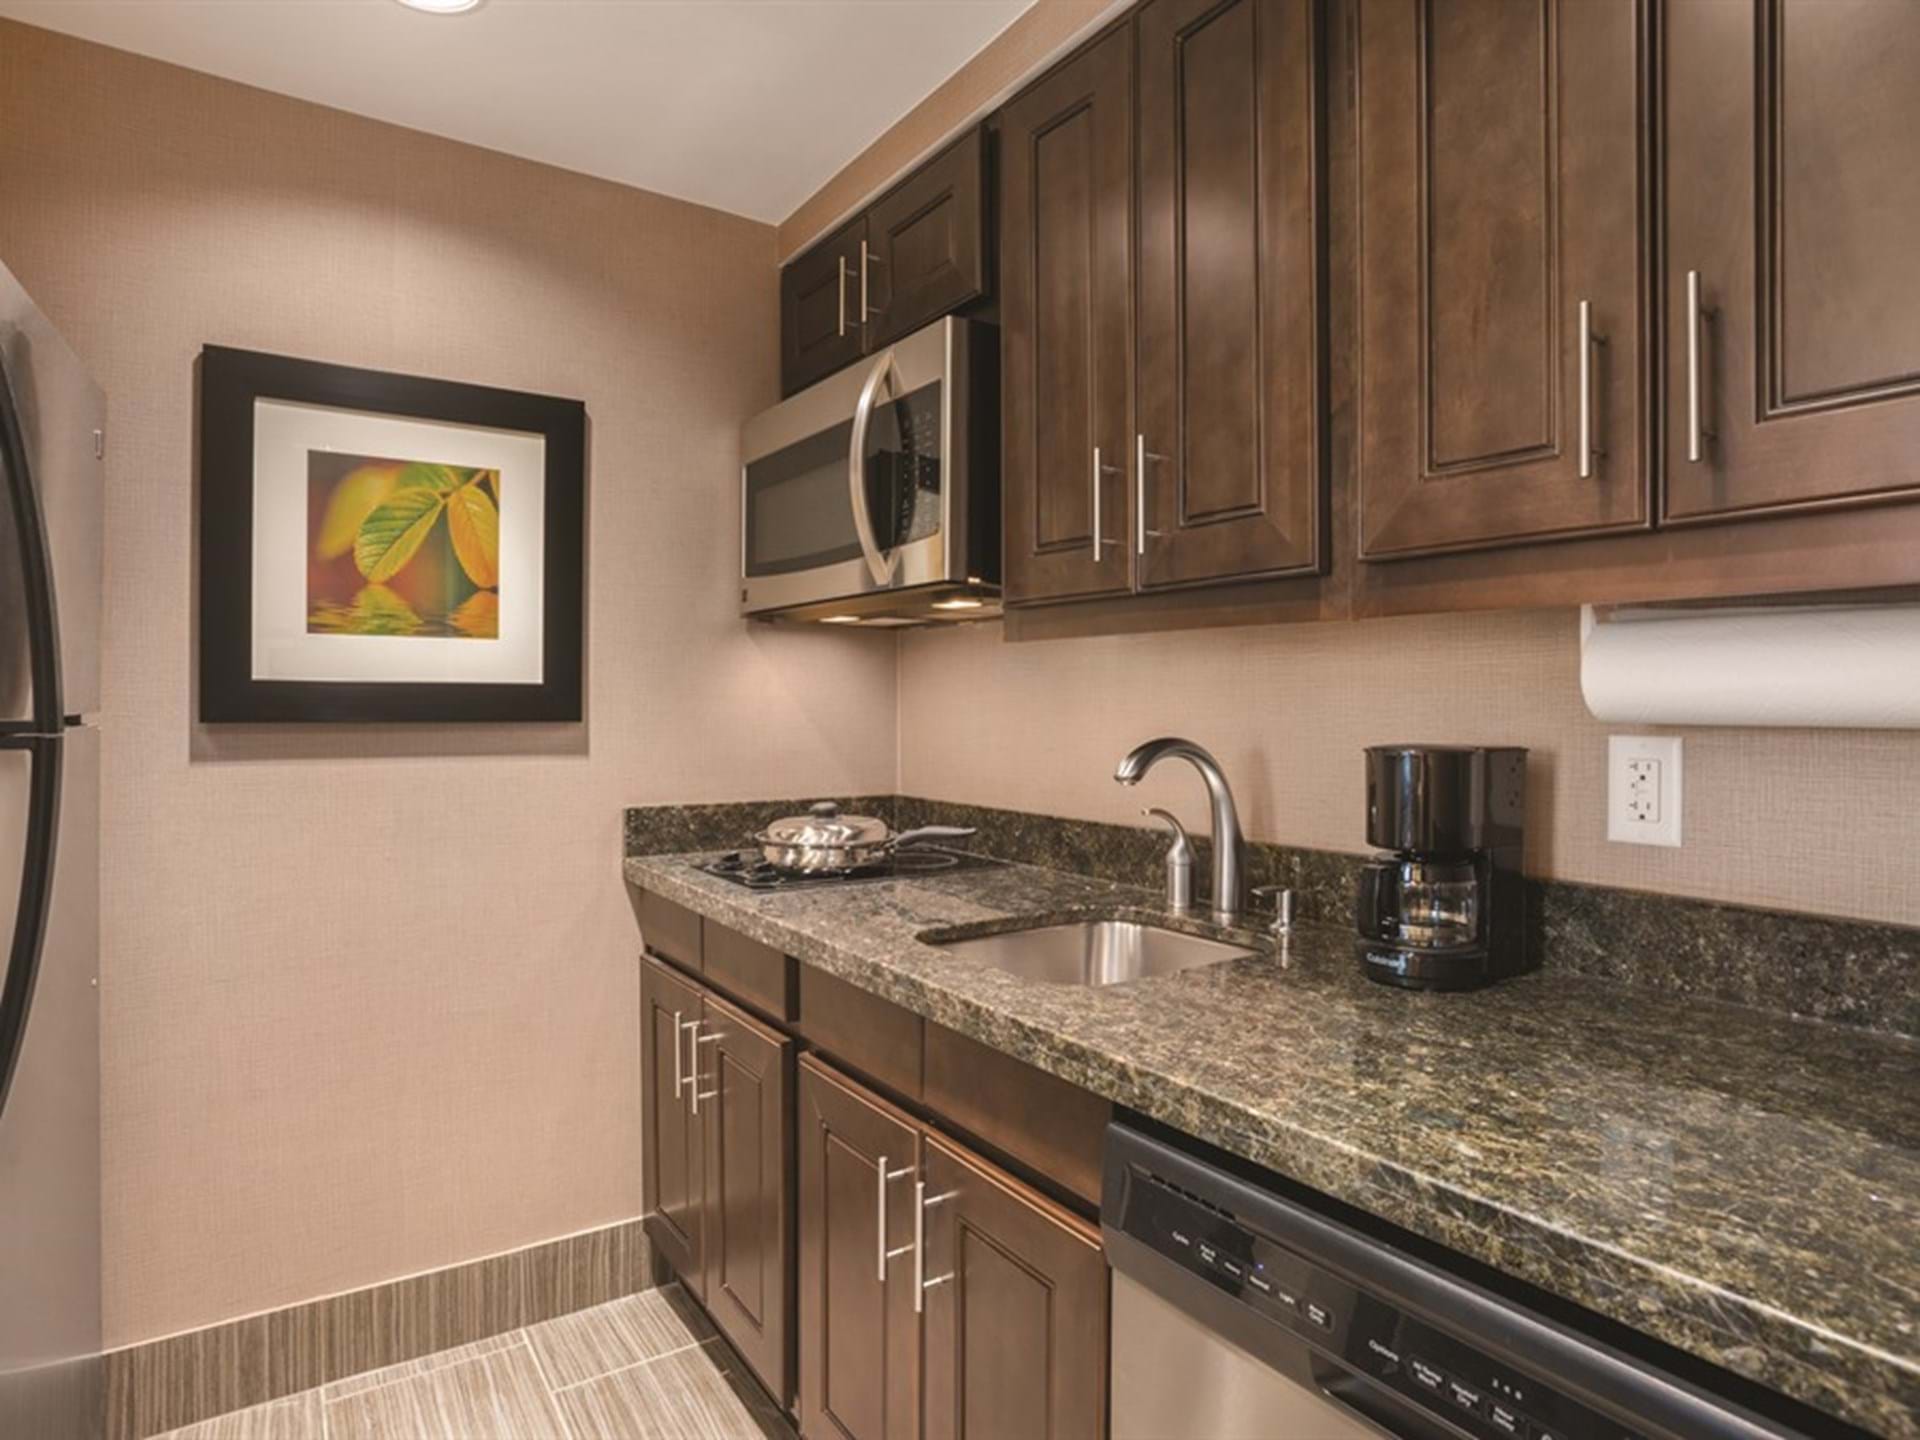 3. Fully equipped kitchen in every suite